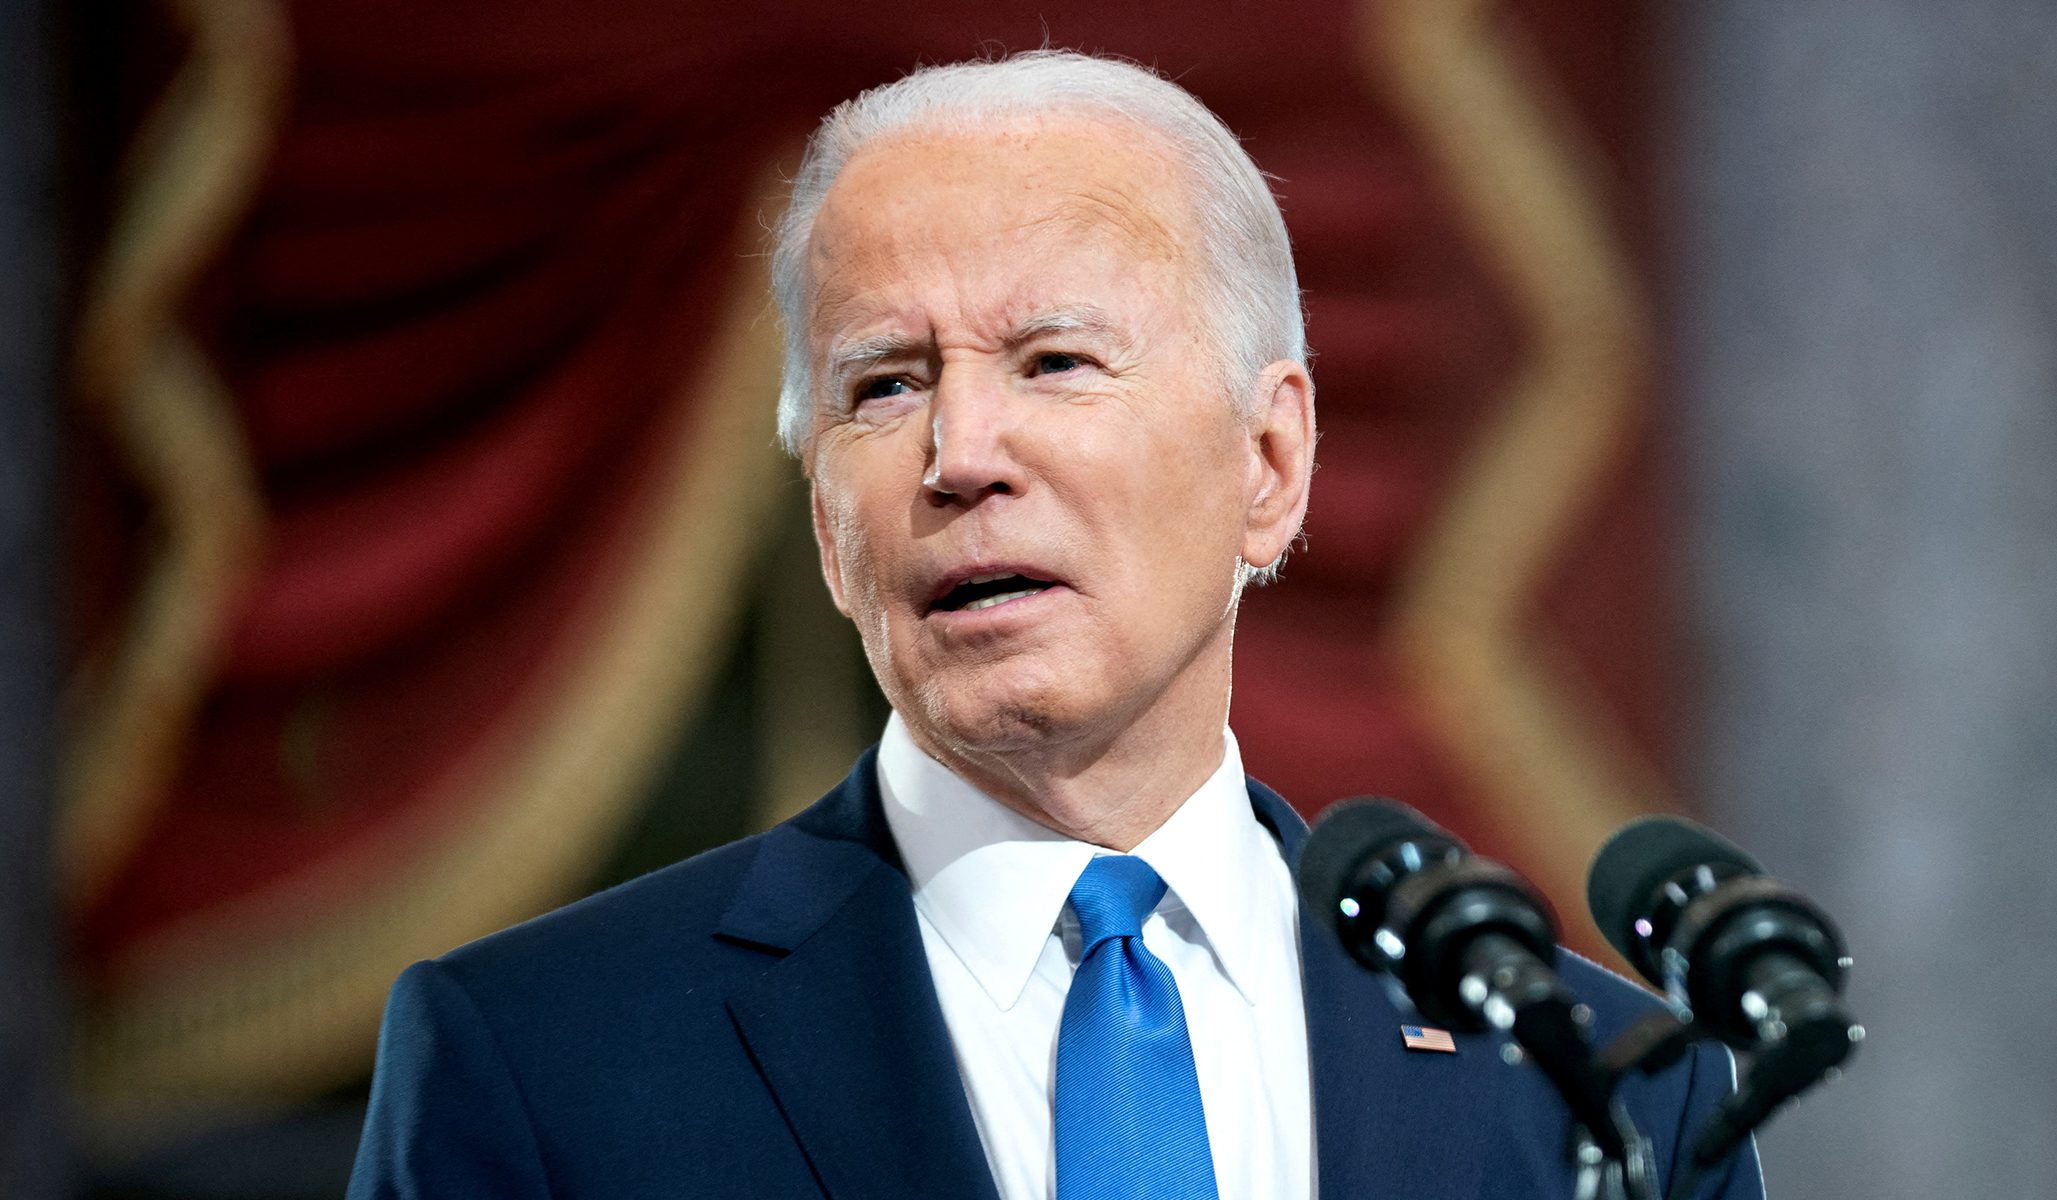 Biden to Advocate Altering the Filibuster to Pass Voting Bill during Georgia Speech